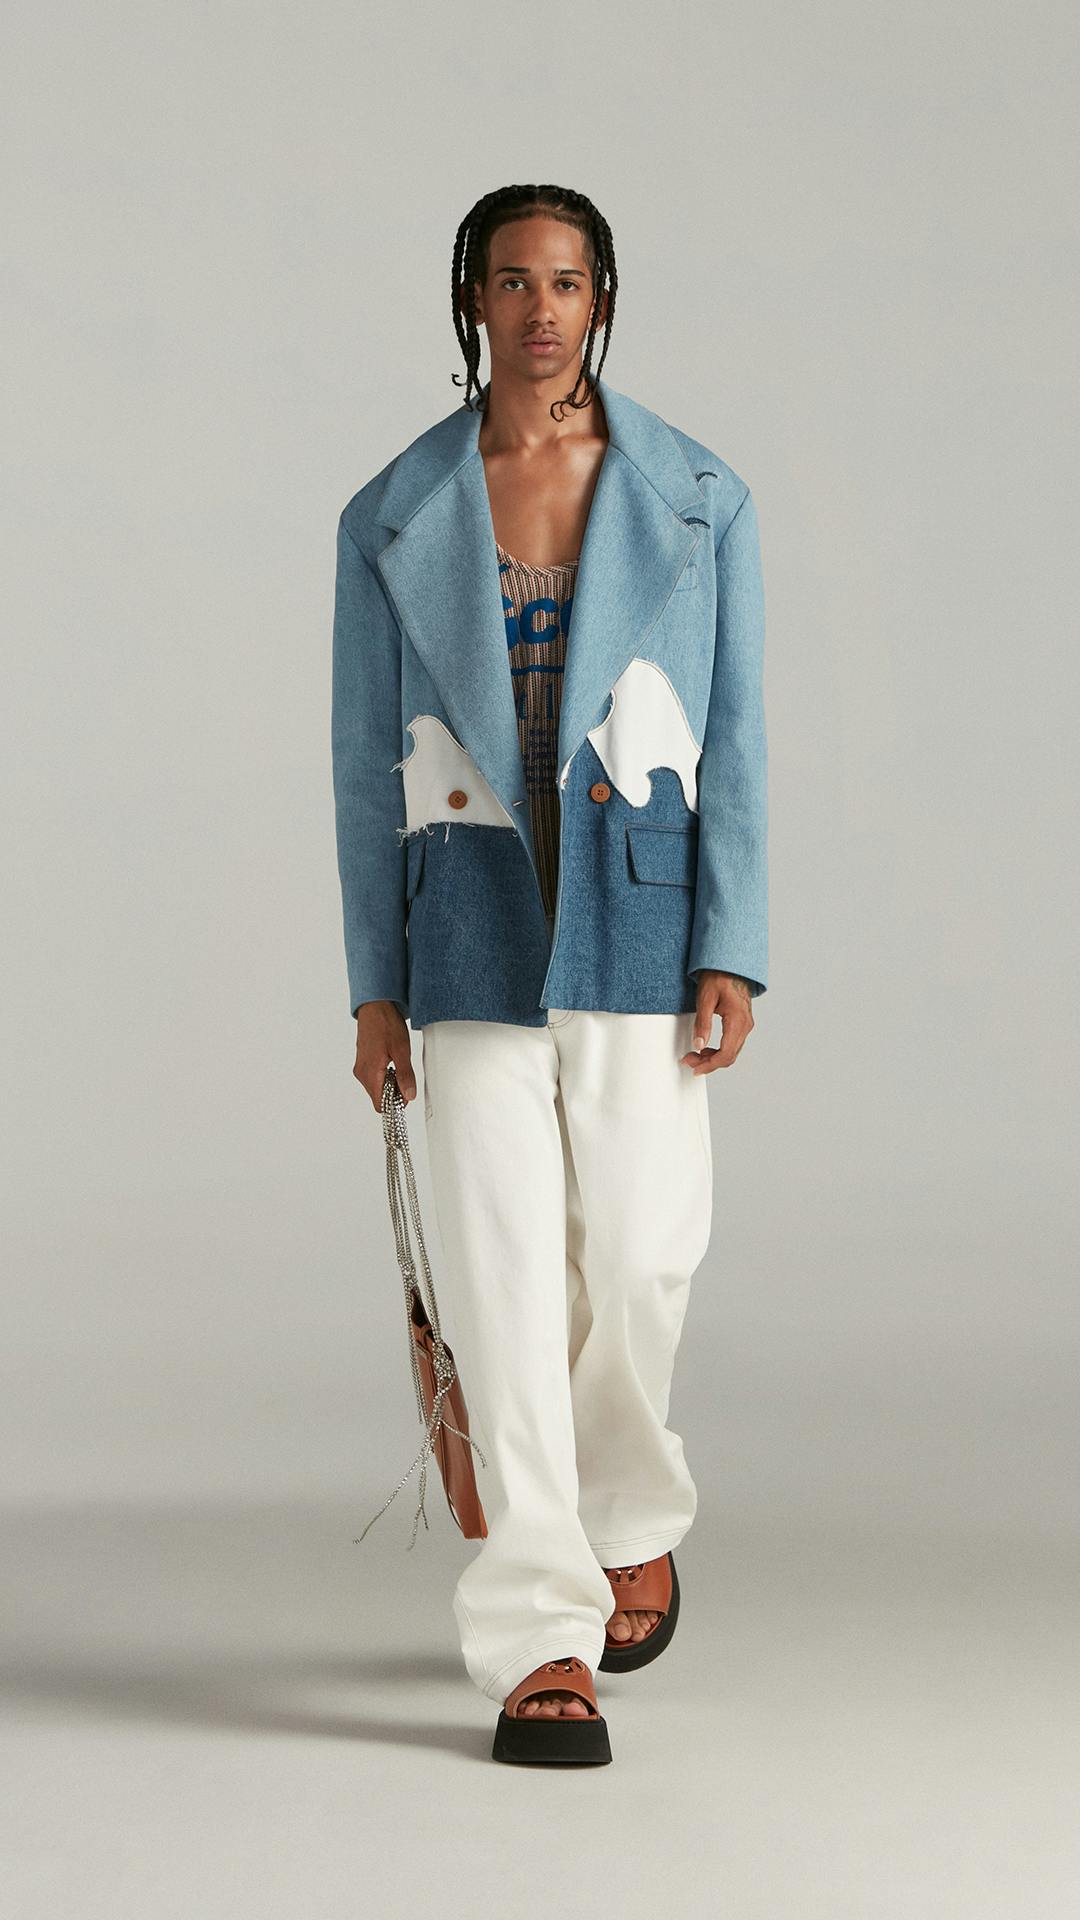 DENIM INSTARSIA JACKET FEATURING WAVE PATTERN AND BAGGY WHITE JEANS